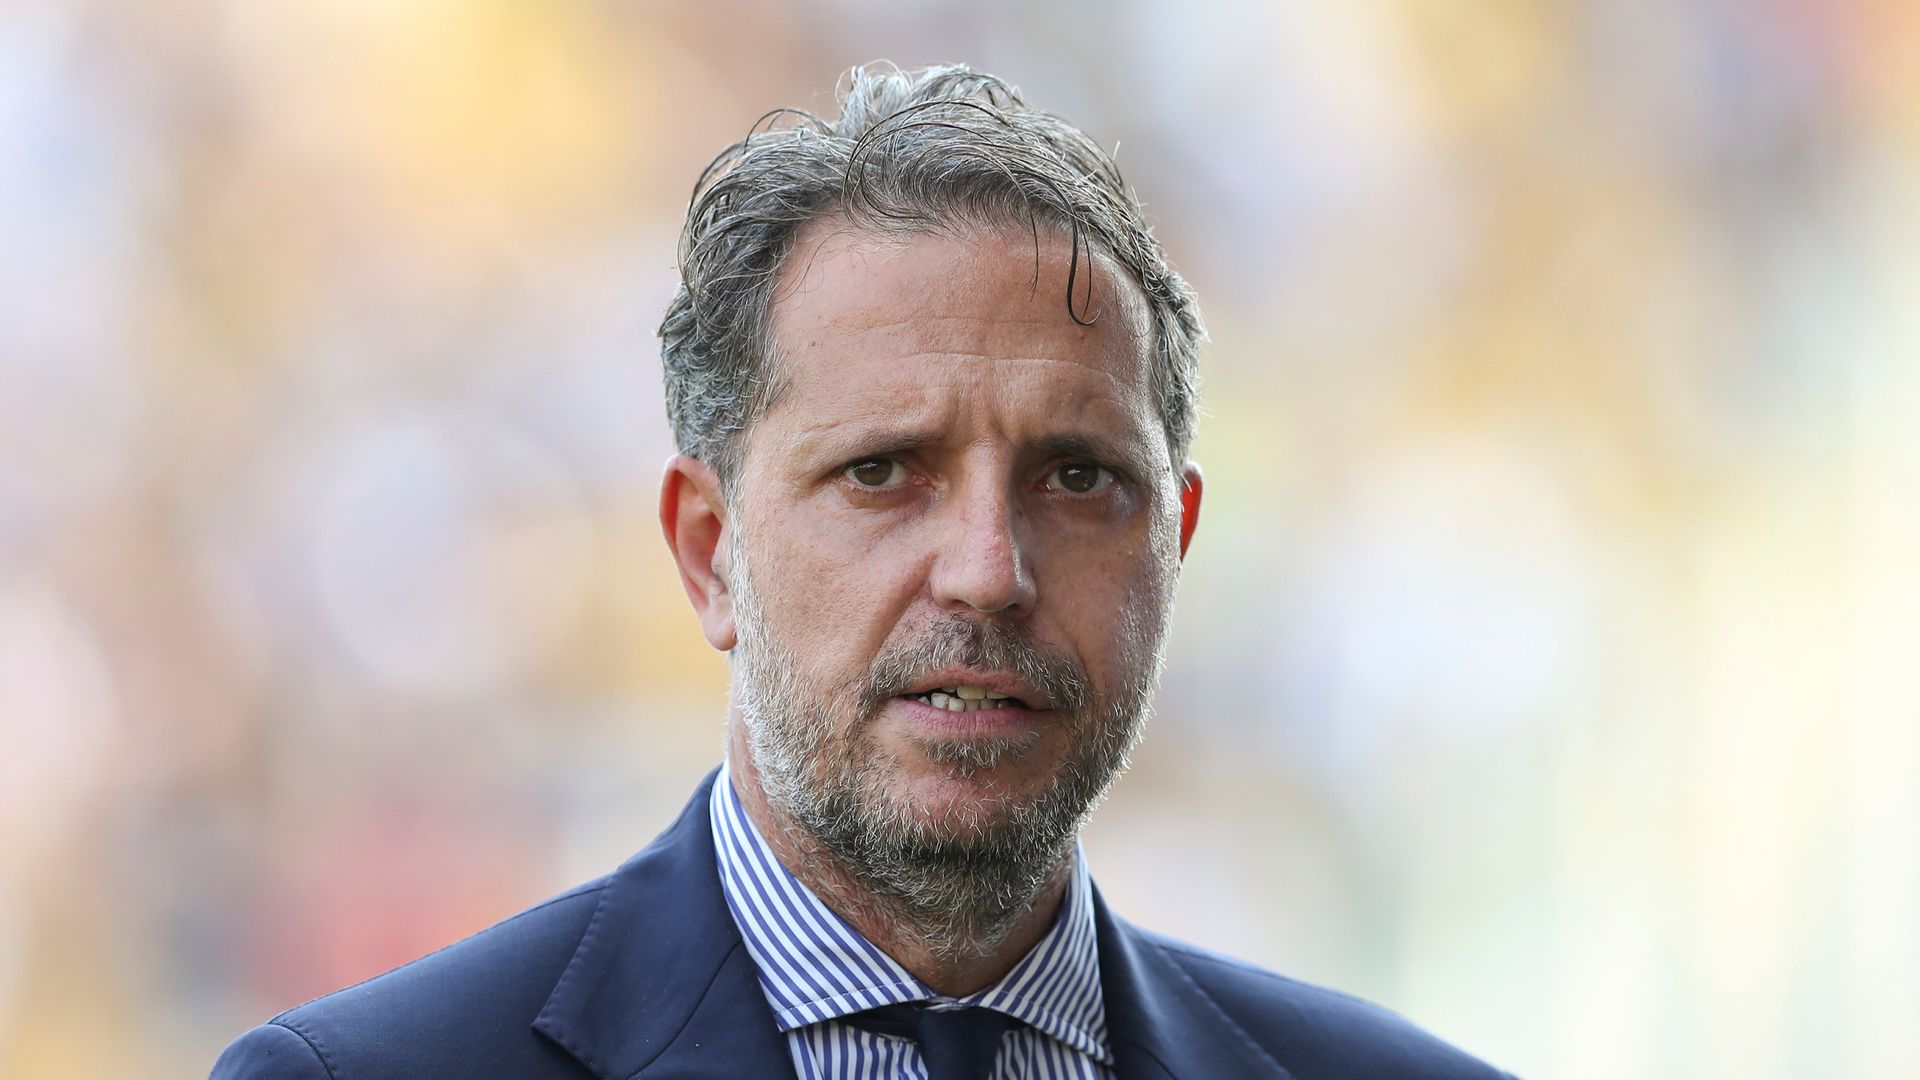 Juve docked 15 points | Paratici banned from Italian football for 30 months